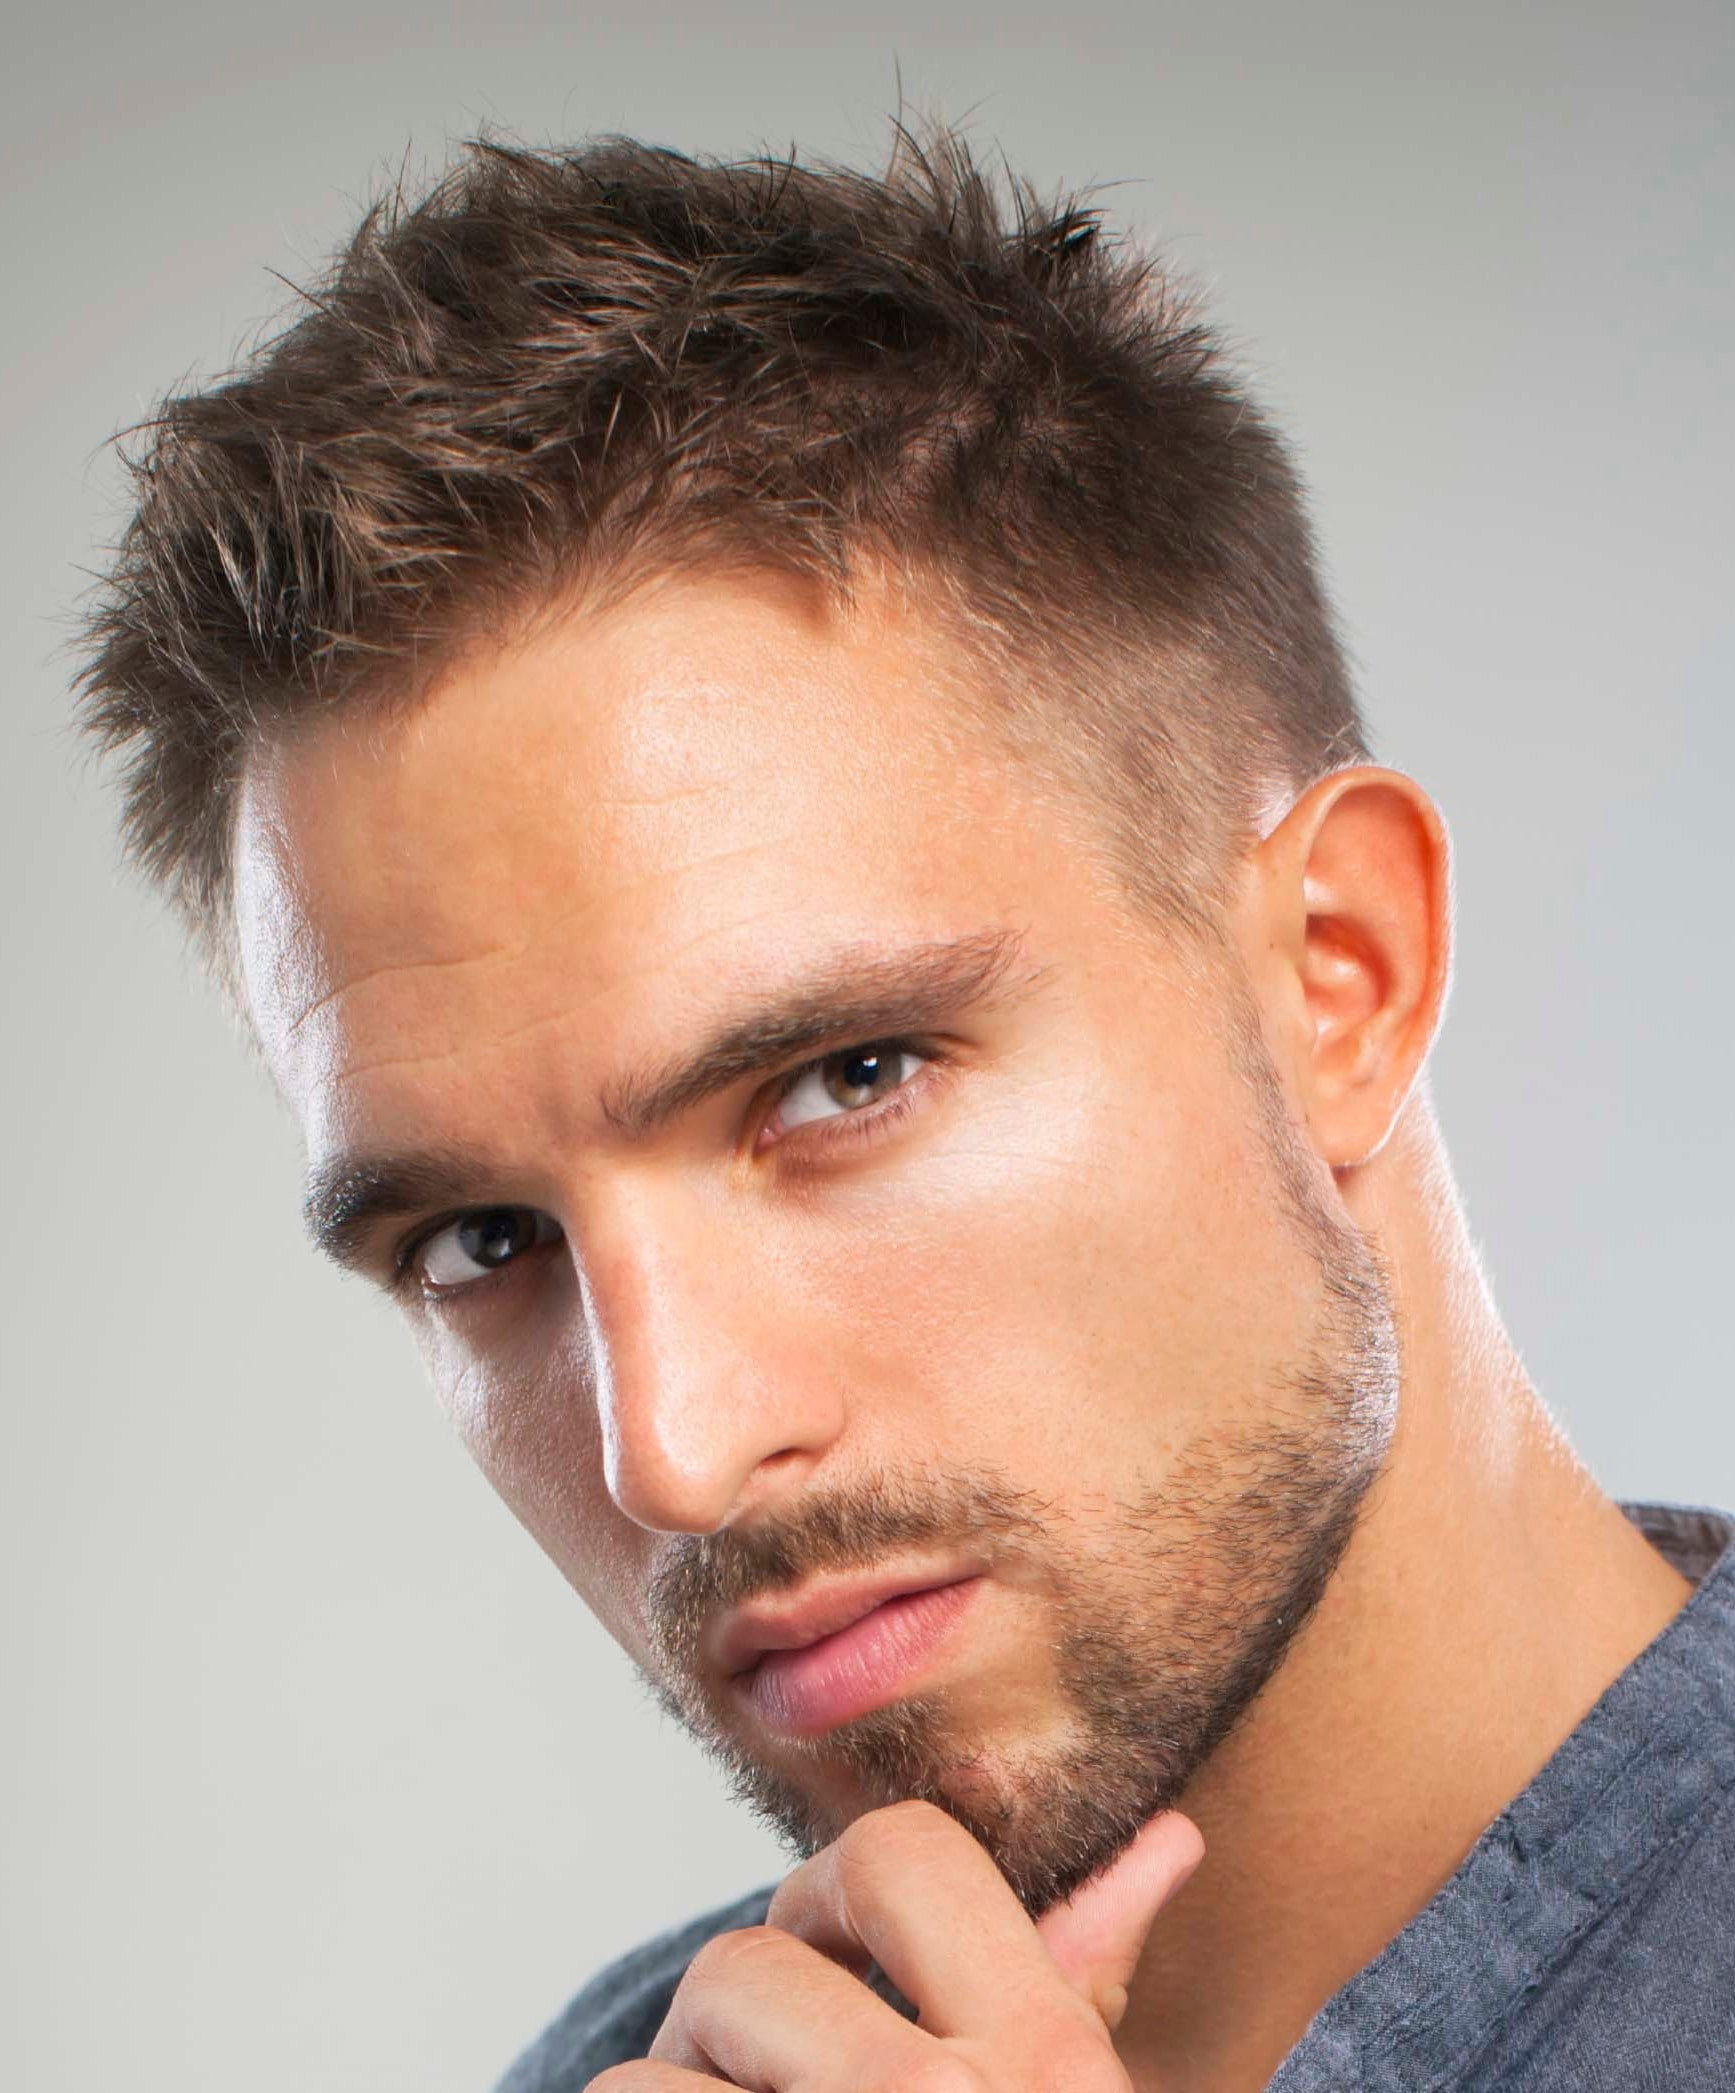 Hairstyles For Fine Hair Male
 5 the best hairstyles for men with thin hair